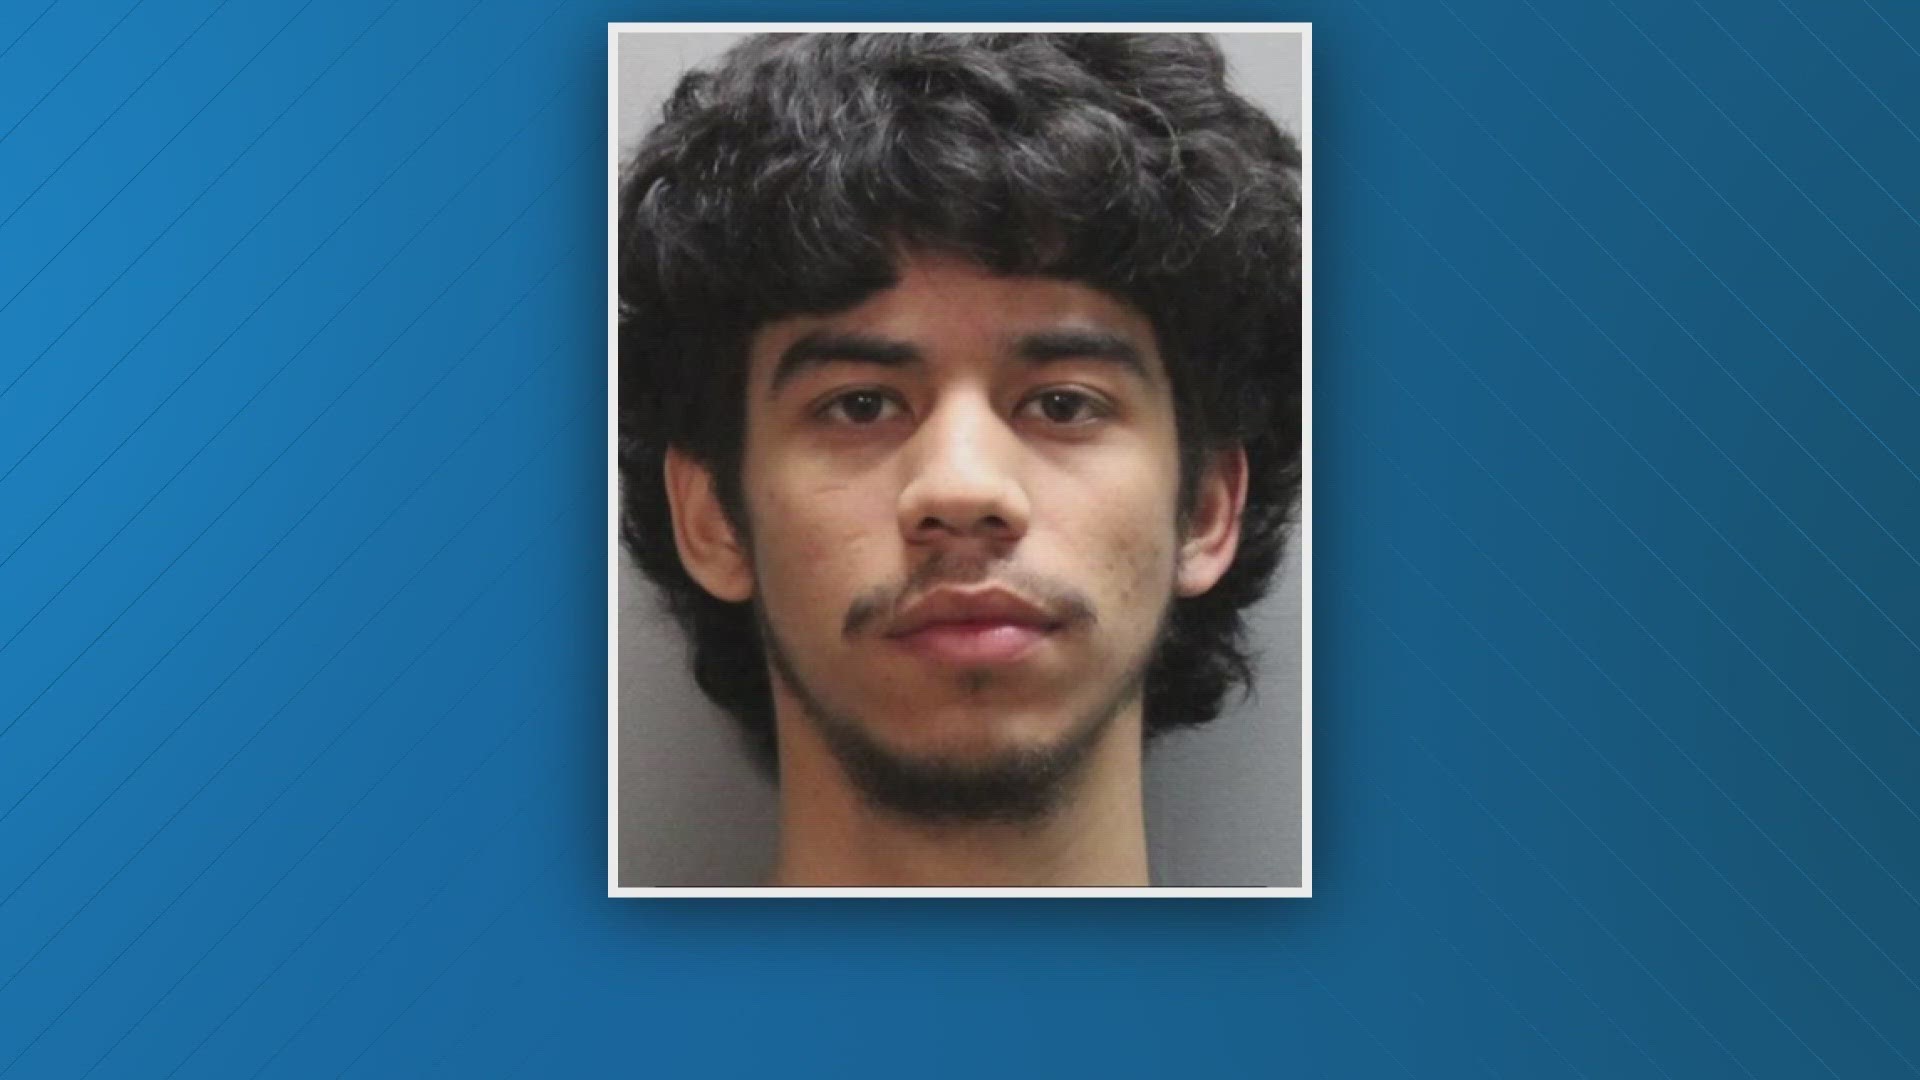 Police detained Jefferson Rodriguez, 20, roughly 30 minutes after a deadly shooting on Barnhill Drive Thursday afternoon. Now, he's accused of murder.